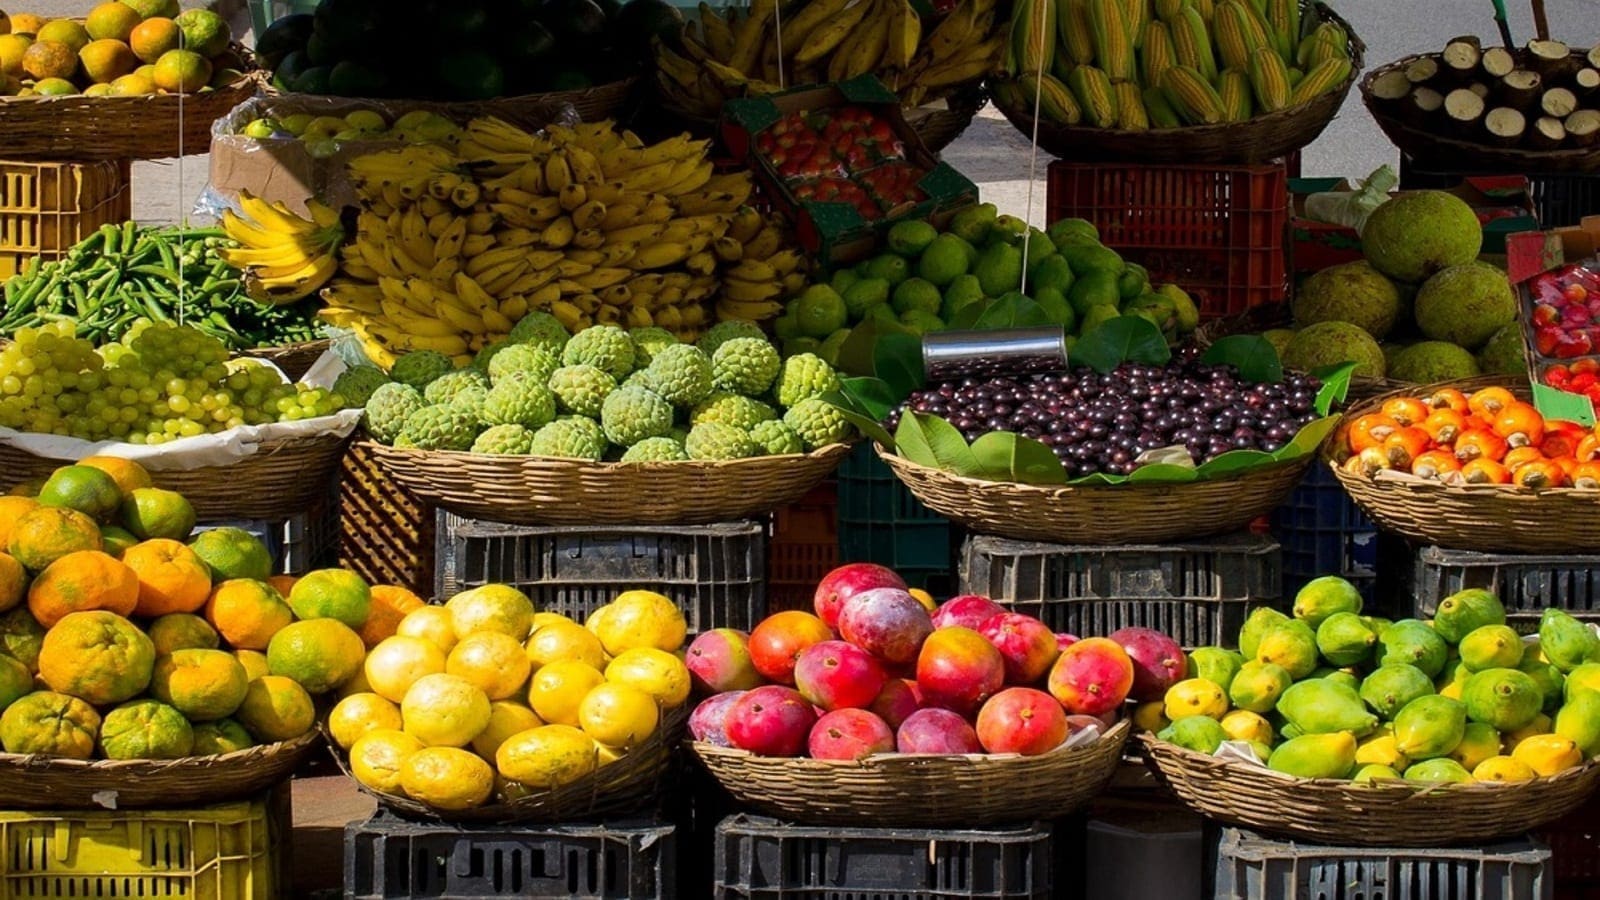 UN launches competition seeking to identify 50 most impactful small food business in the World